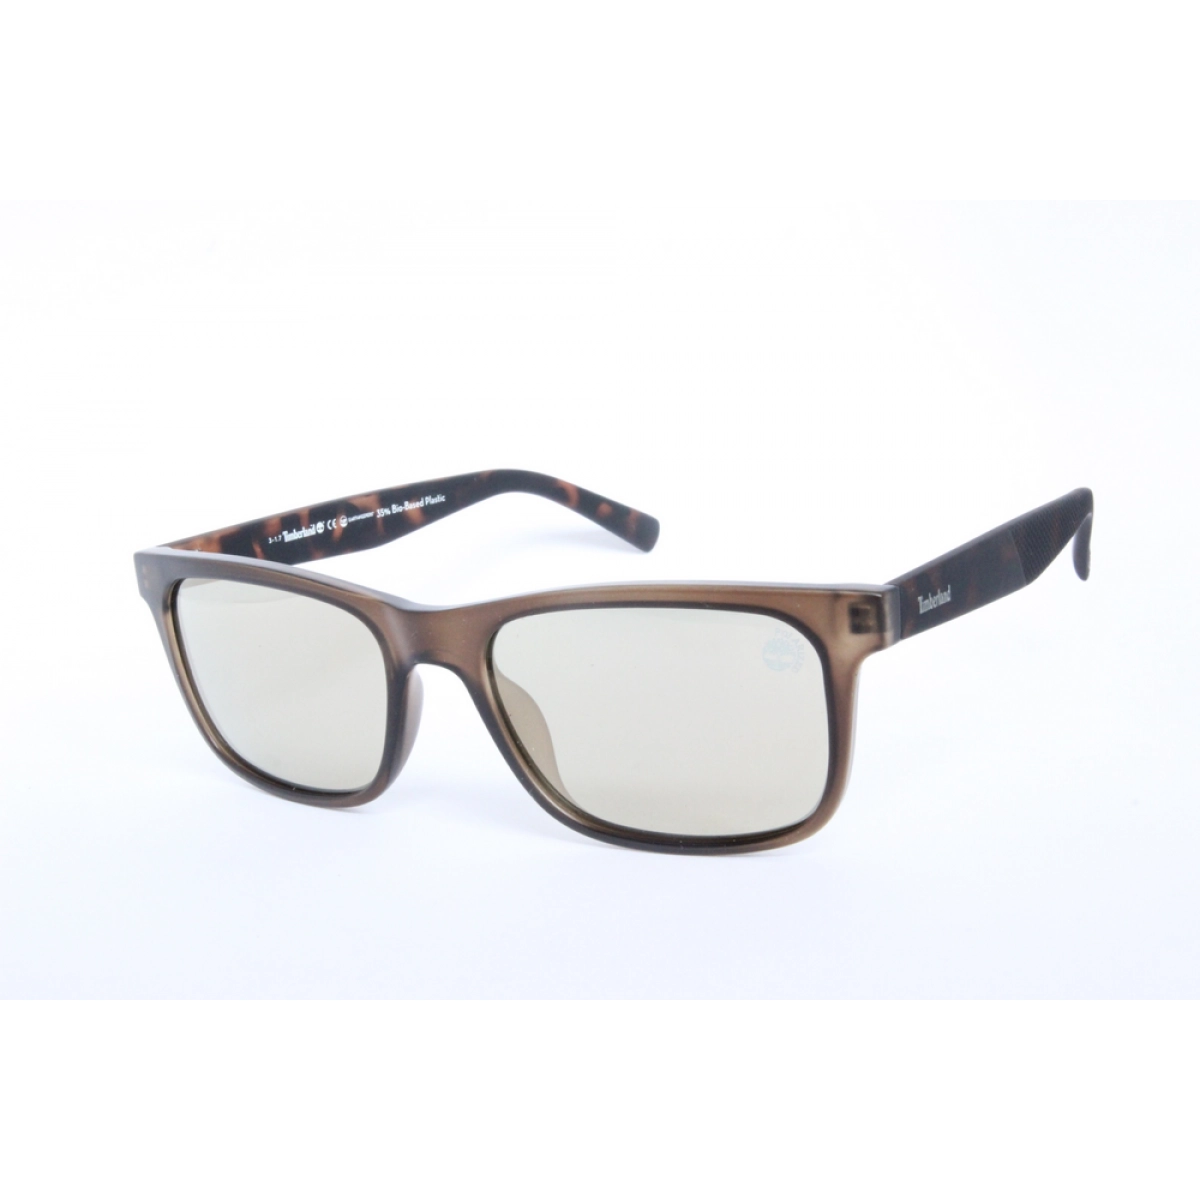 GLASSES FOR MAN TIMBERLAND TB9141-5597R